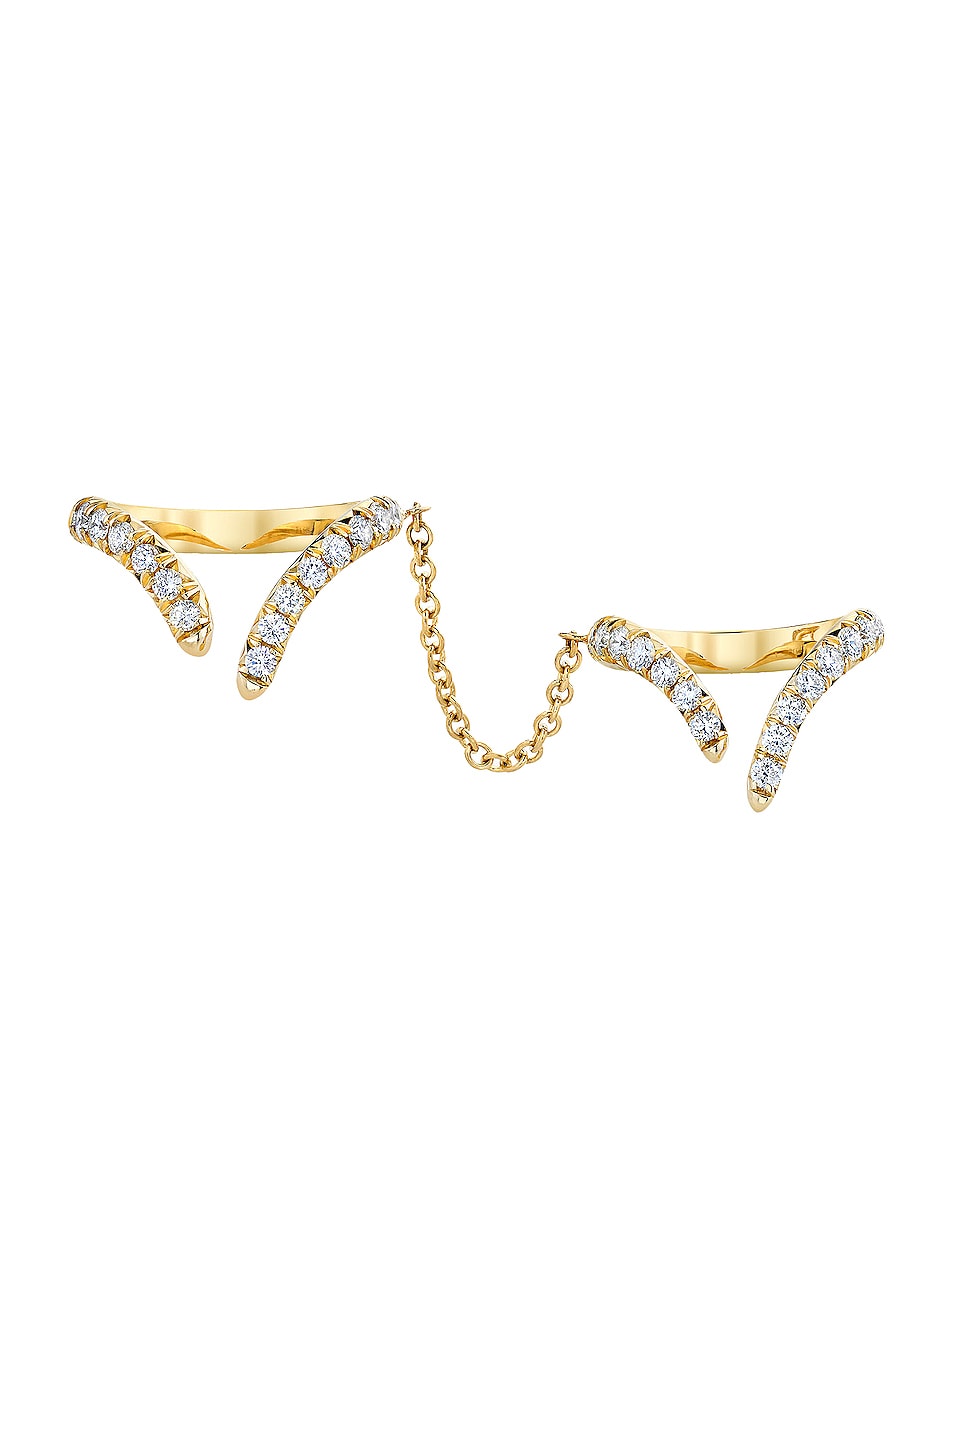 Image 1 of Logan Hollowell Double French Pave Diamond Tusk Ring With Chain Connector in 14k Yellow Gold & White Diamonds